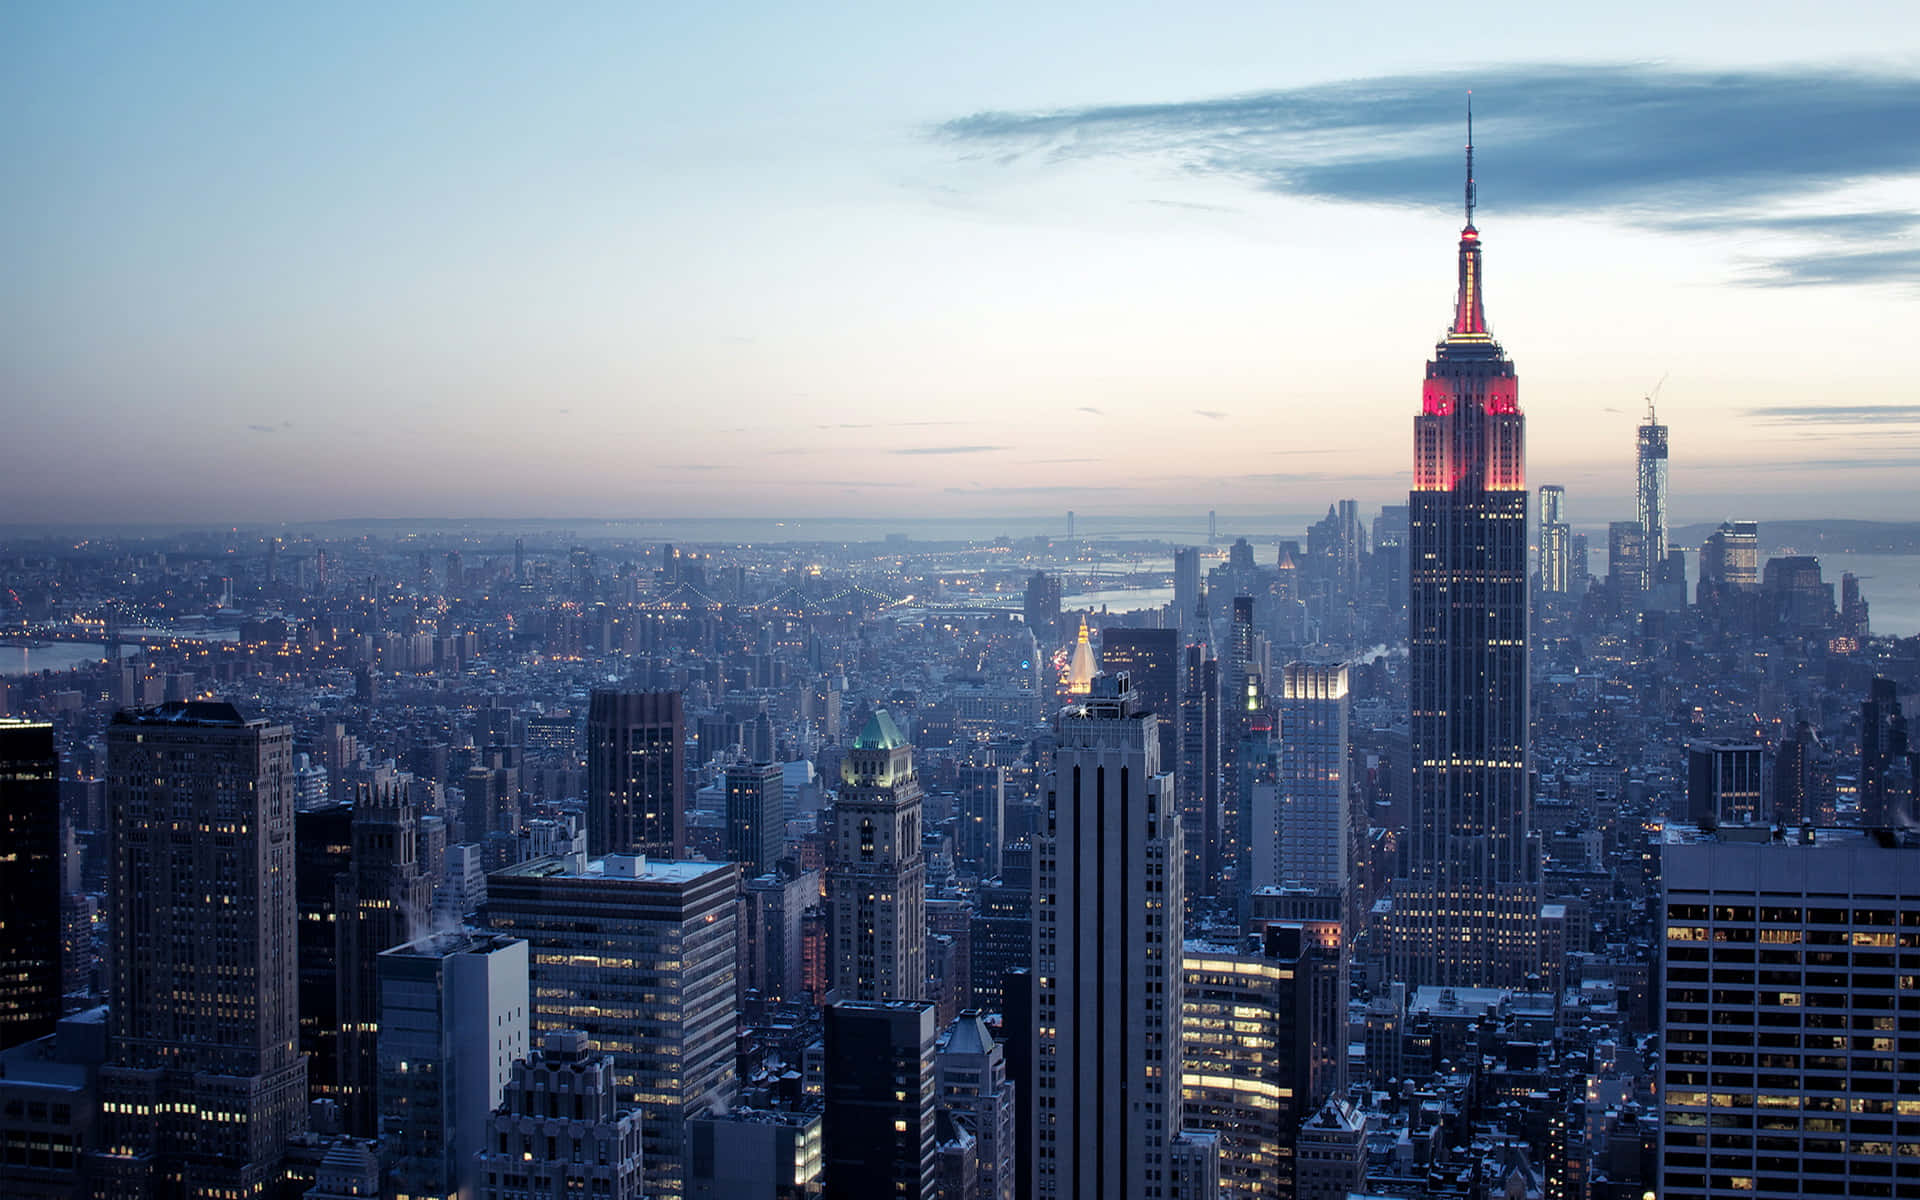 The historic skyline of Manhattan, with the iconic Empire State Building standing tall